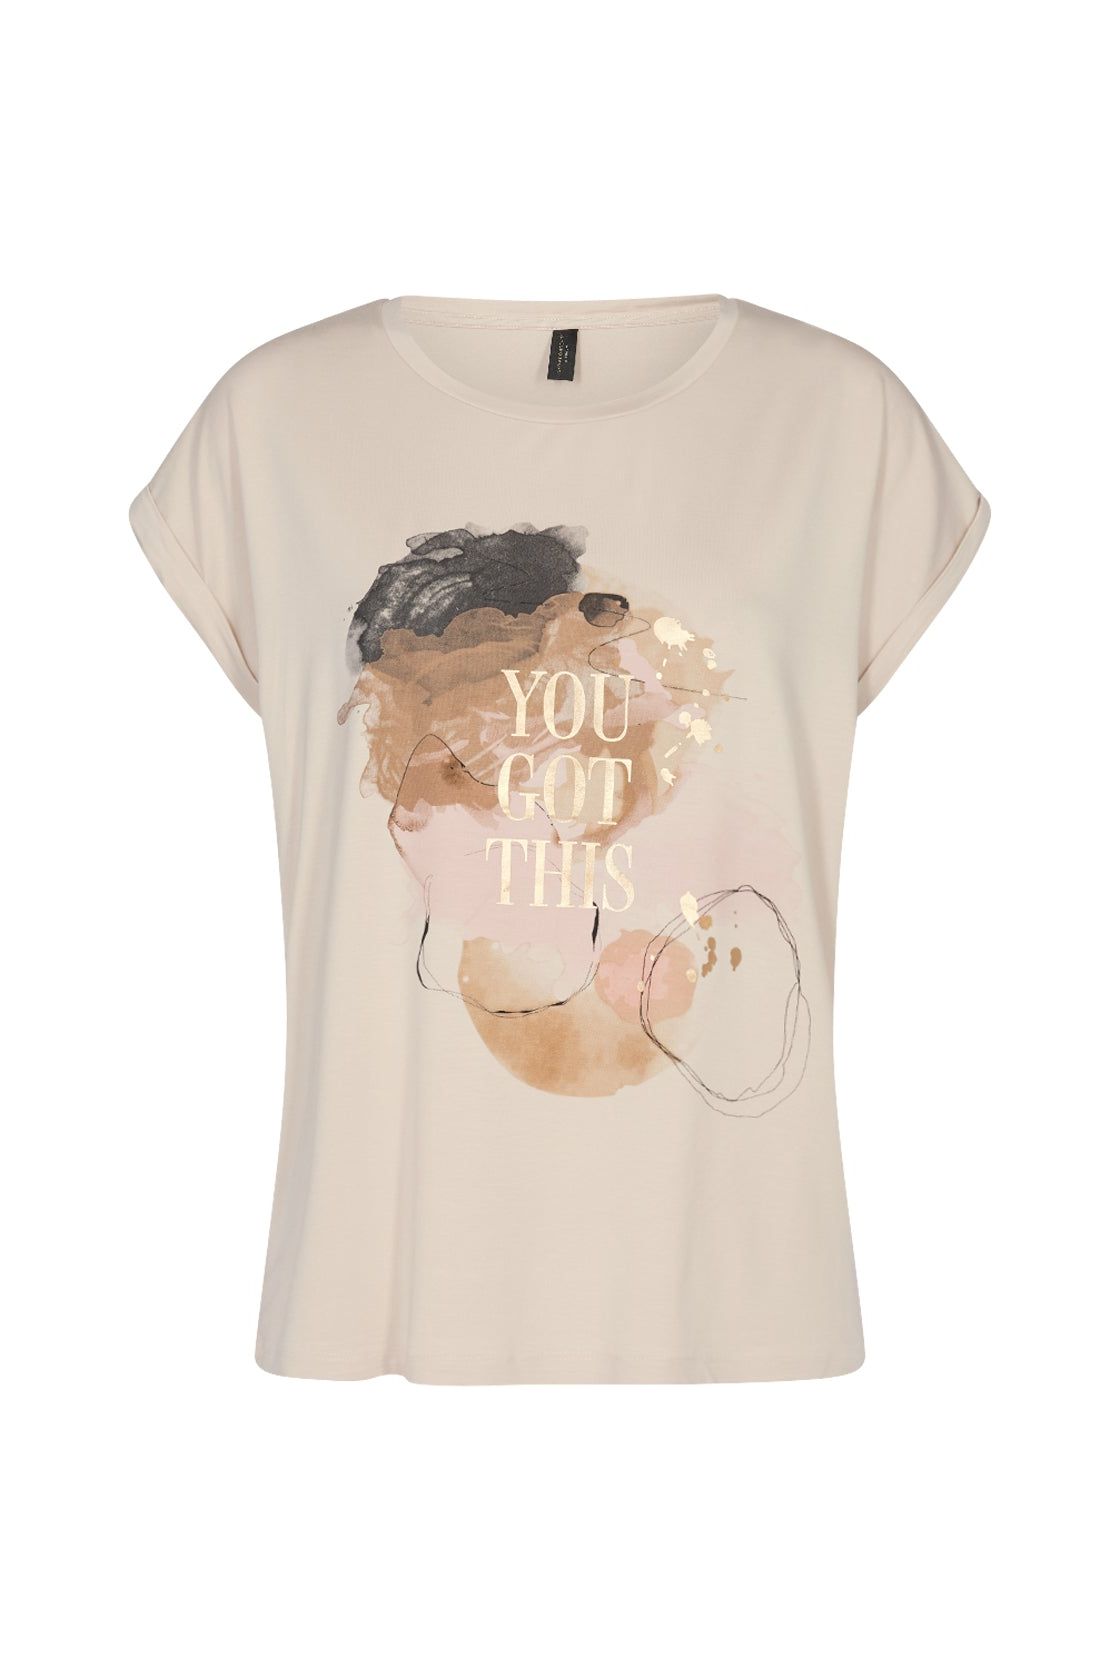 Soya Concept - Ladies Knitted T-Shirt  with the words "You Got This" - Cream - P25608